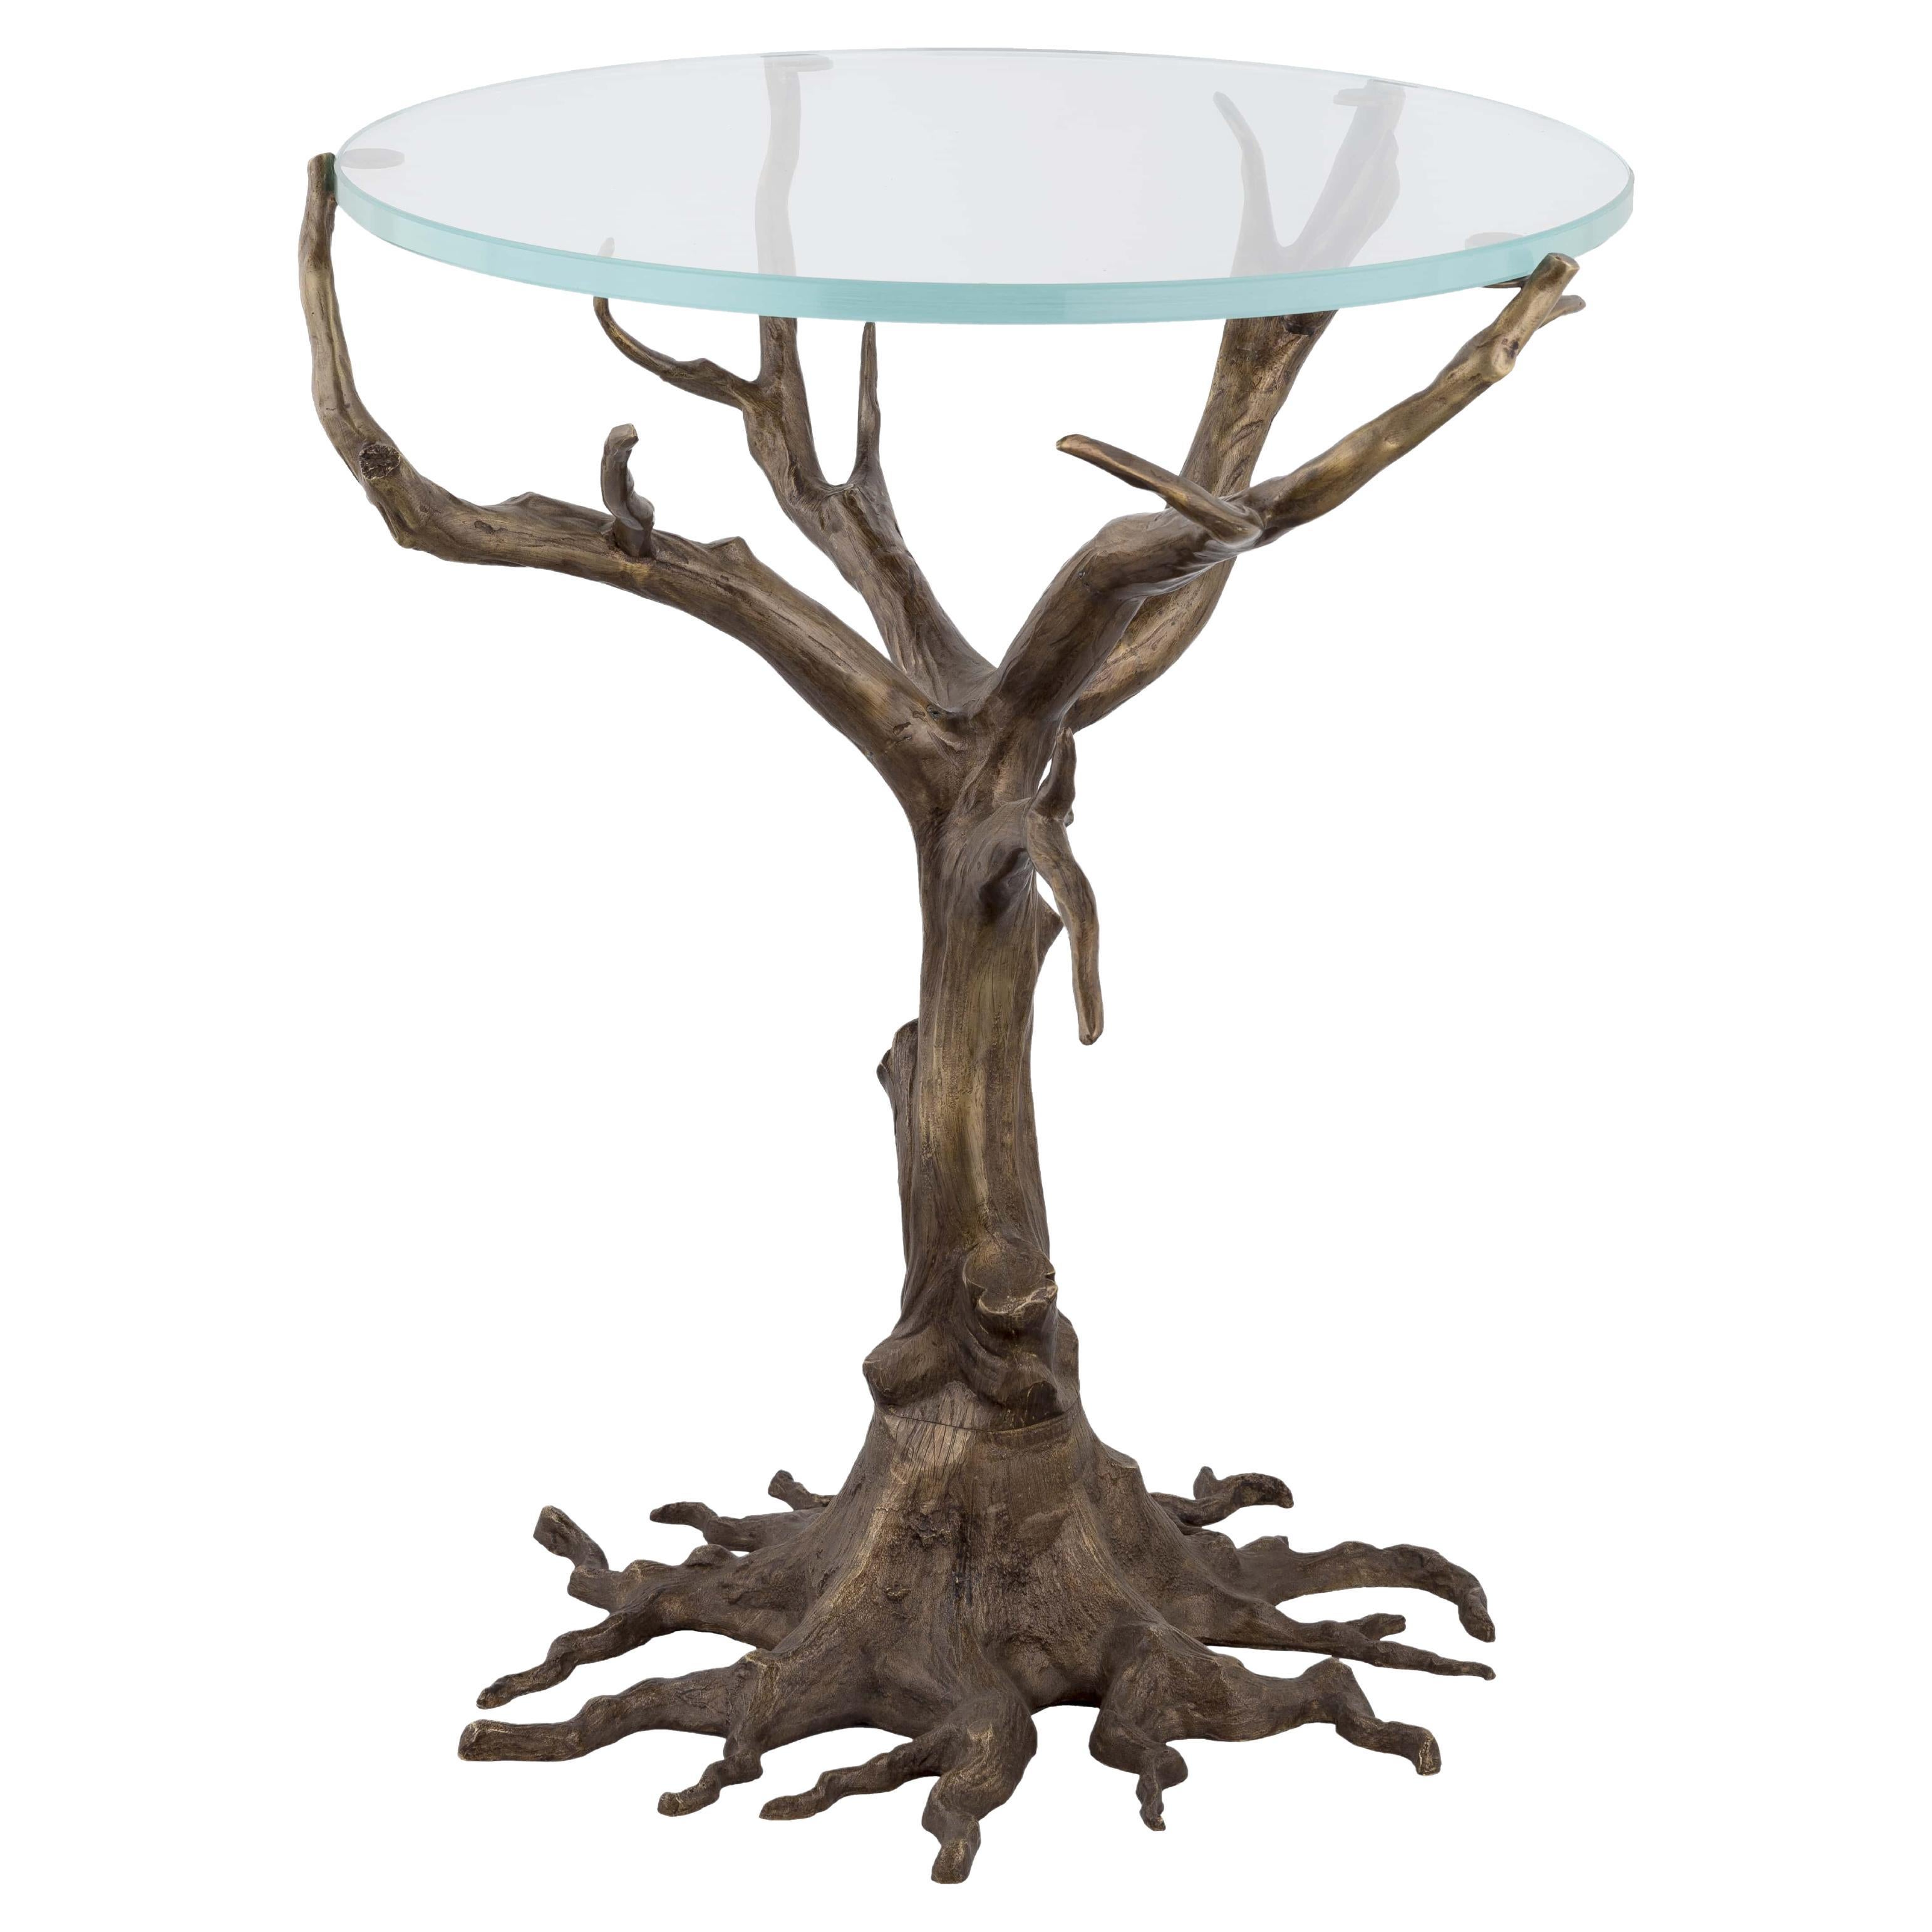  Table d'appoint Rosa Canina en laiton 